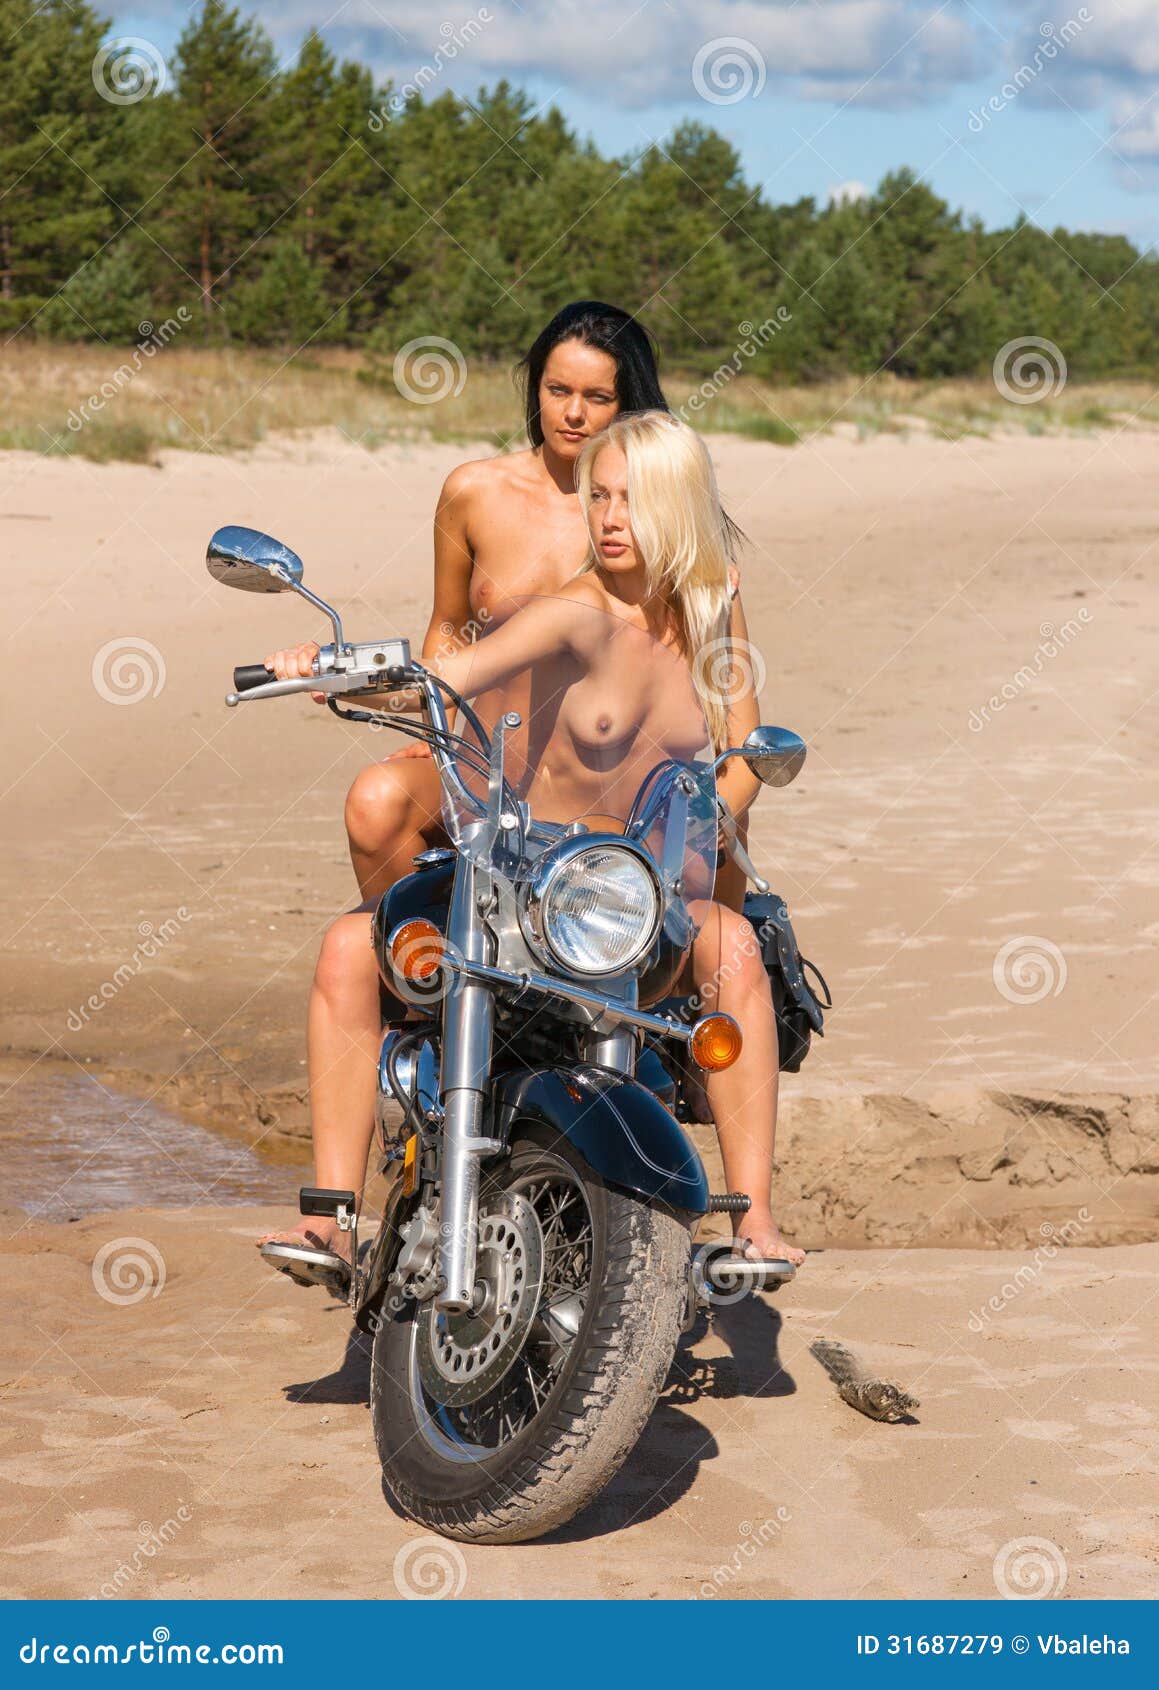 Naked chick motorcycle